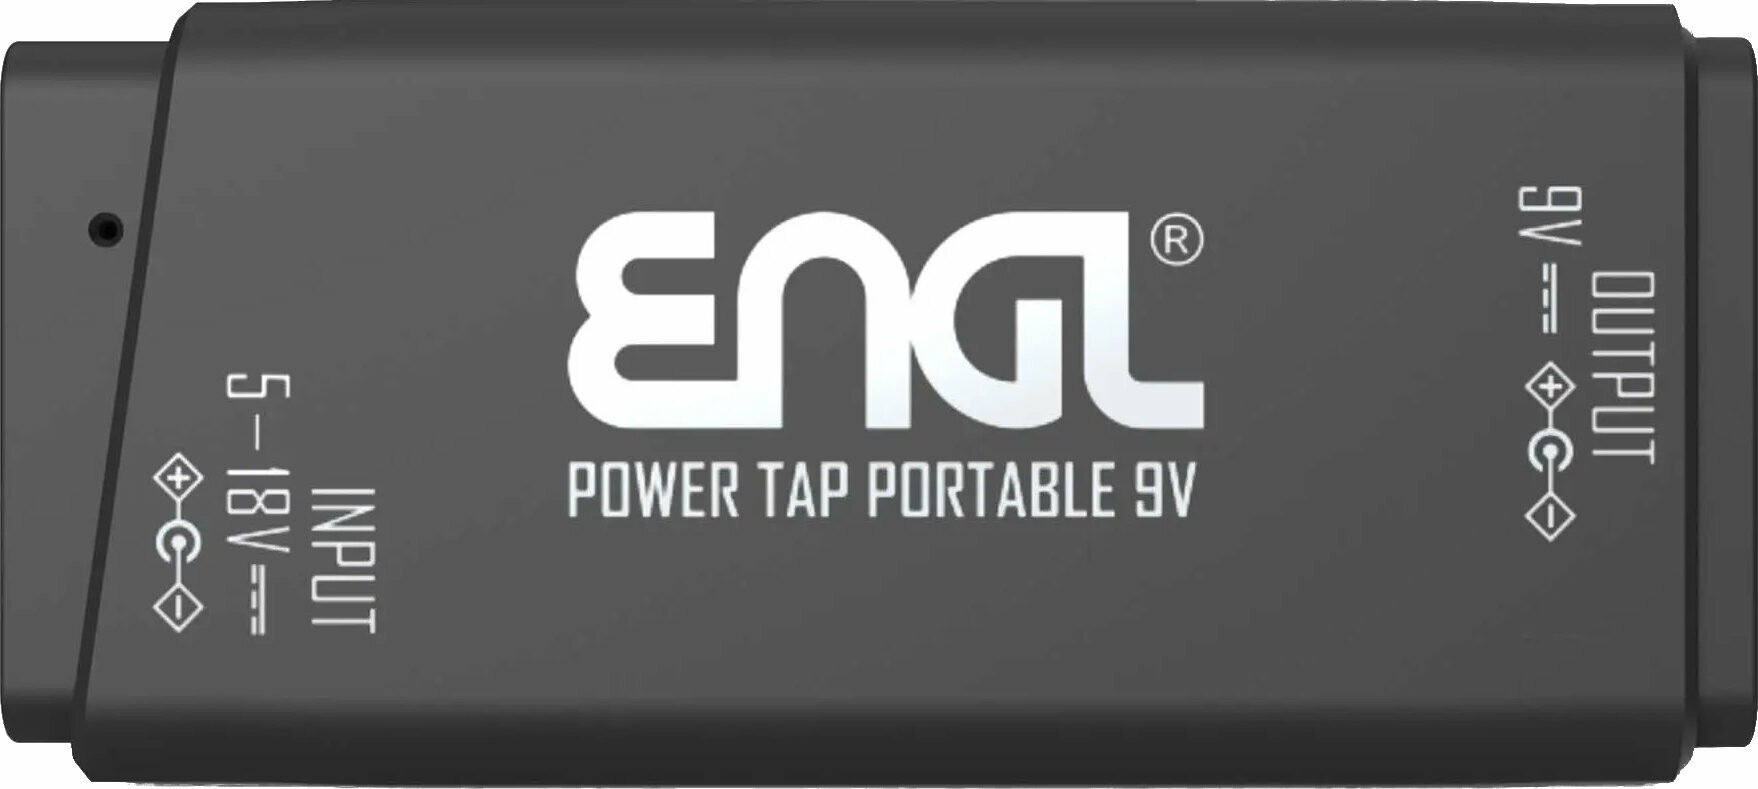 Voedingsadapter Engl Power Tap Portable / USB to 9V